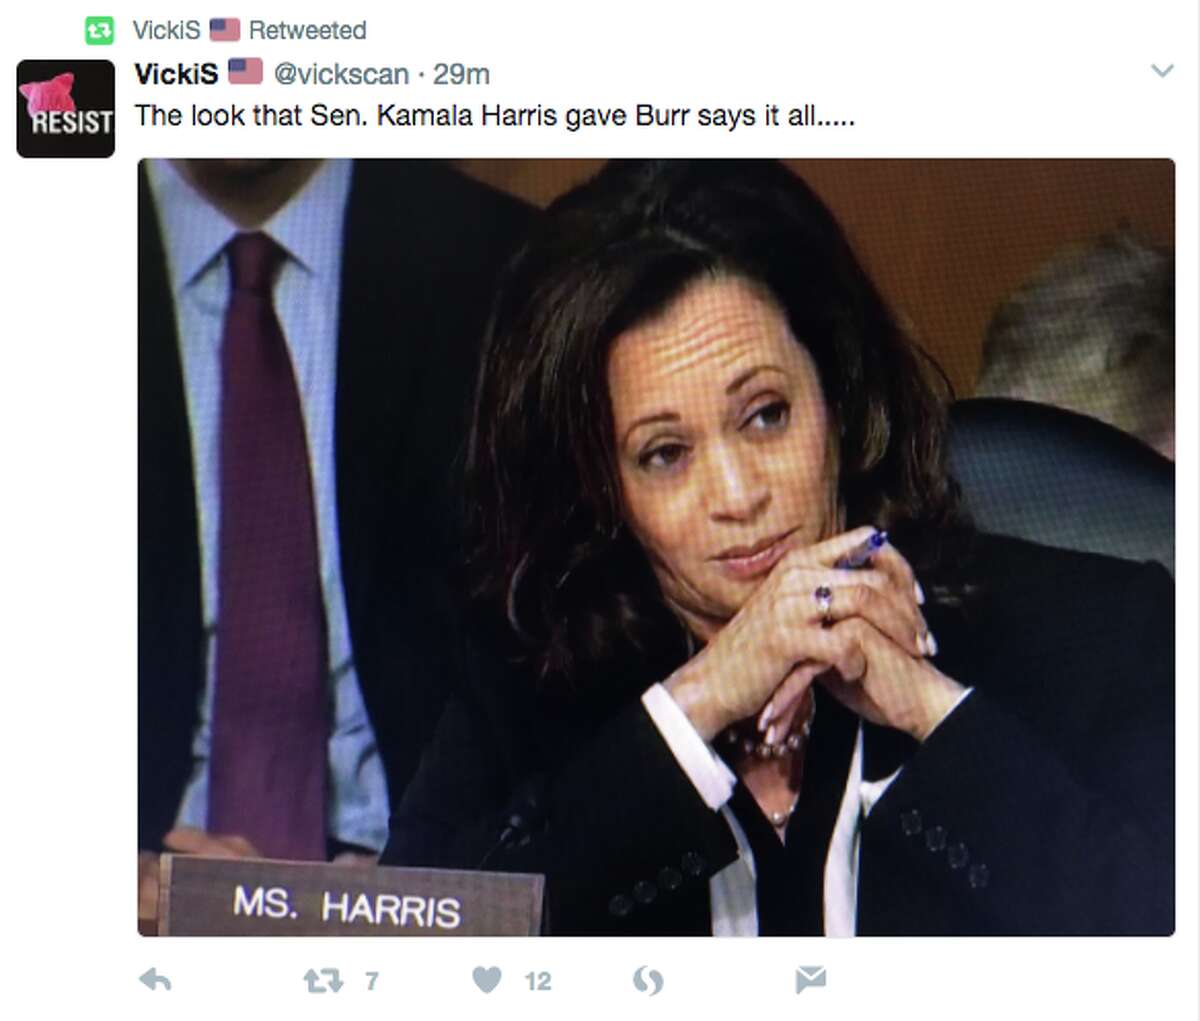 Twitter reacts to Sen. Kamala Harris (D-CA) during the Senate Intelligence Committee questioning, where she was interrupted by Sen. John McCain (R-AZ) and Richard Burr (R-NC).